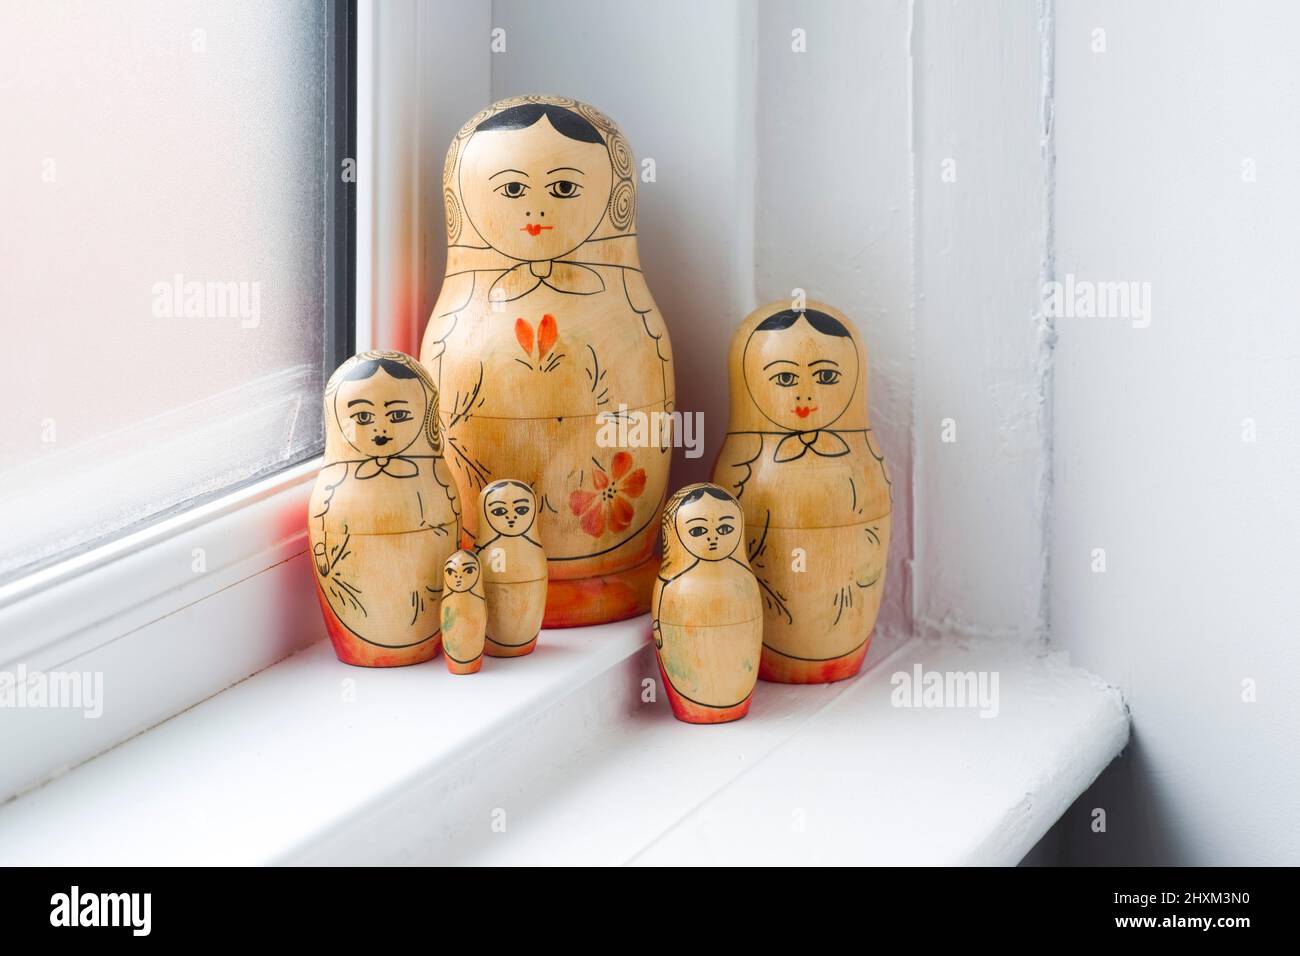 Family of Russian Dolls in a grouping on a window sill Stock Photo